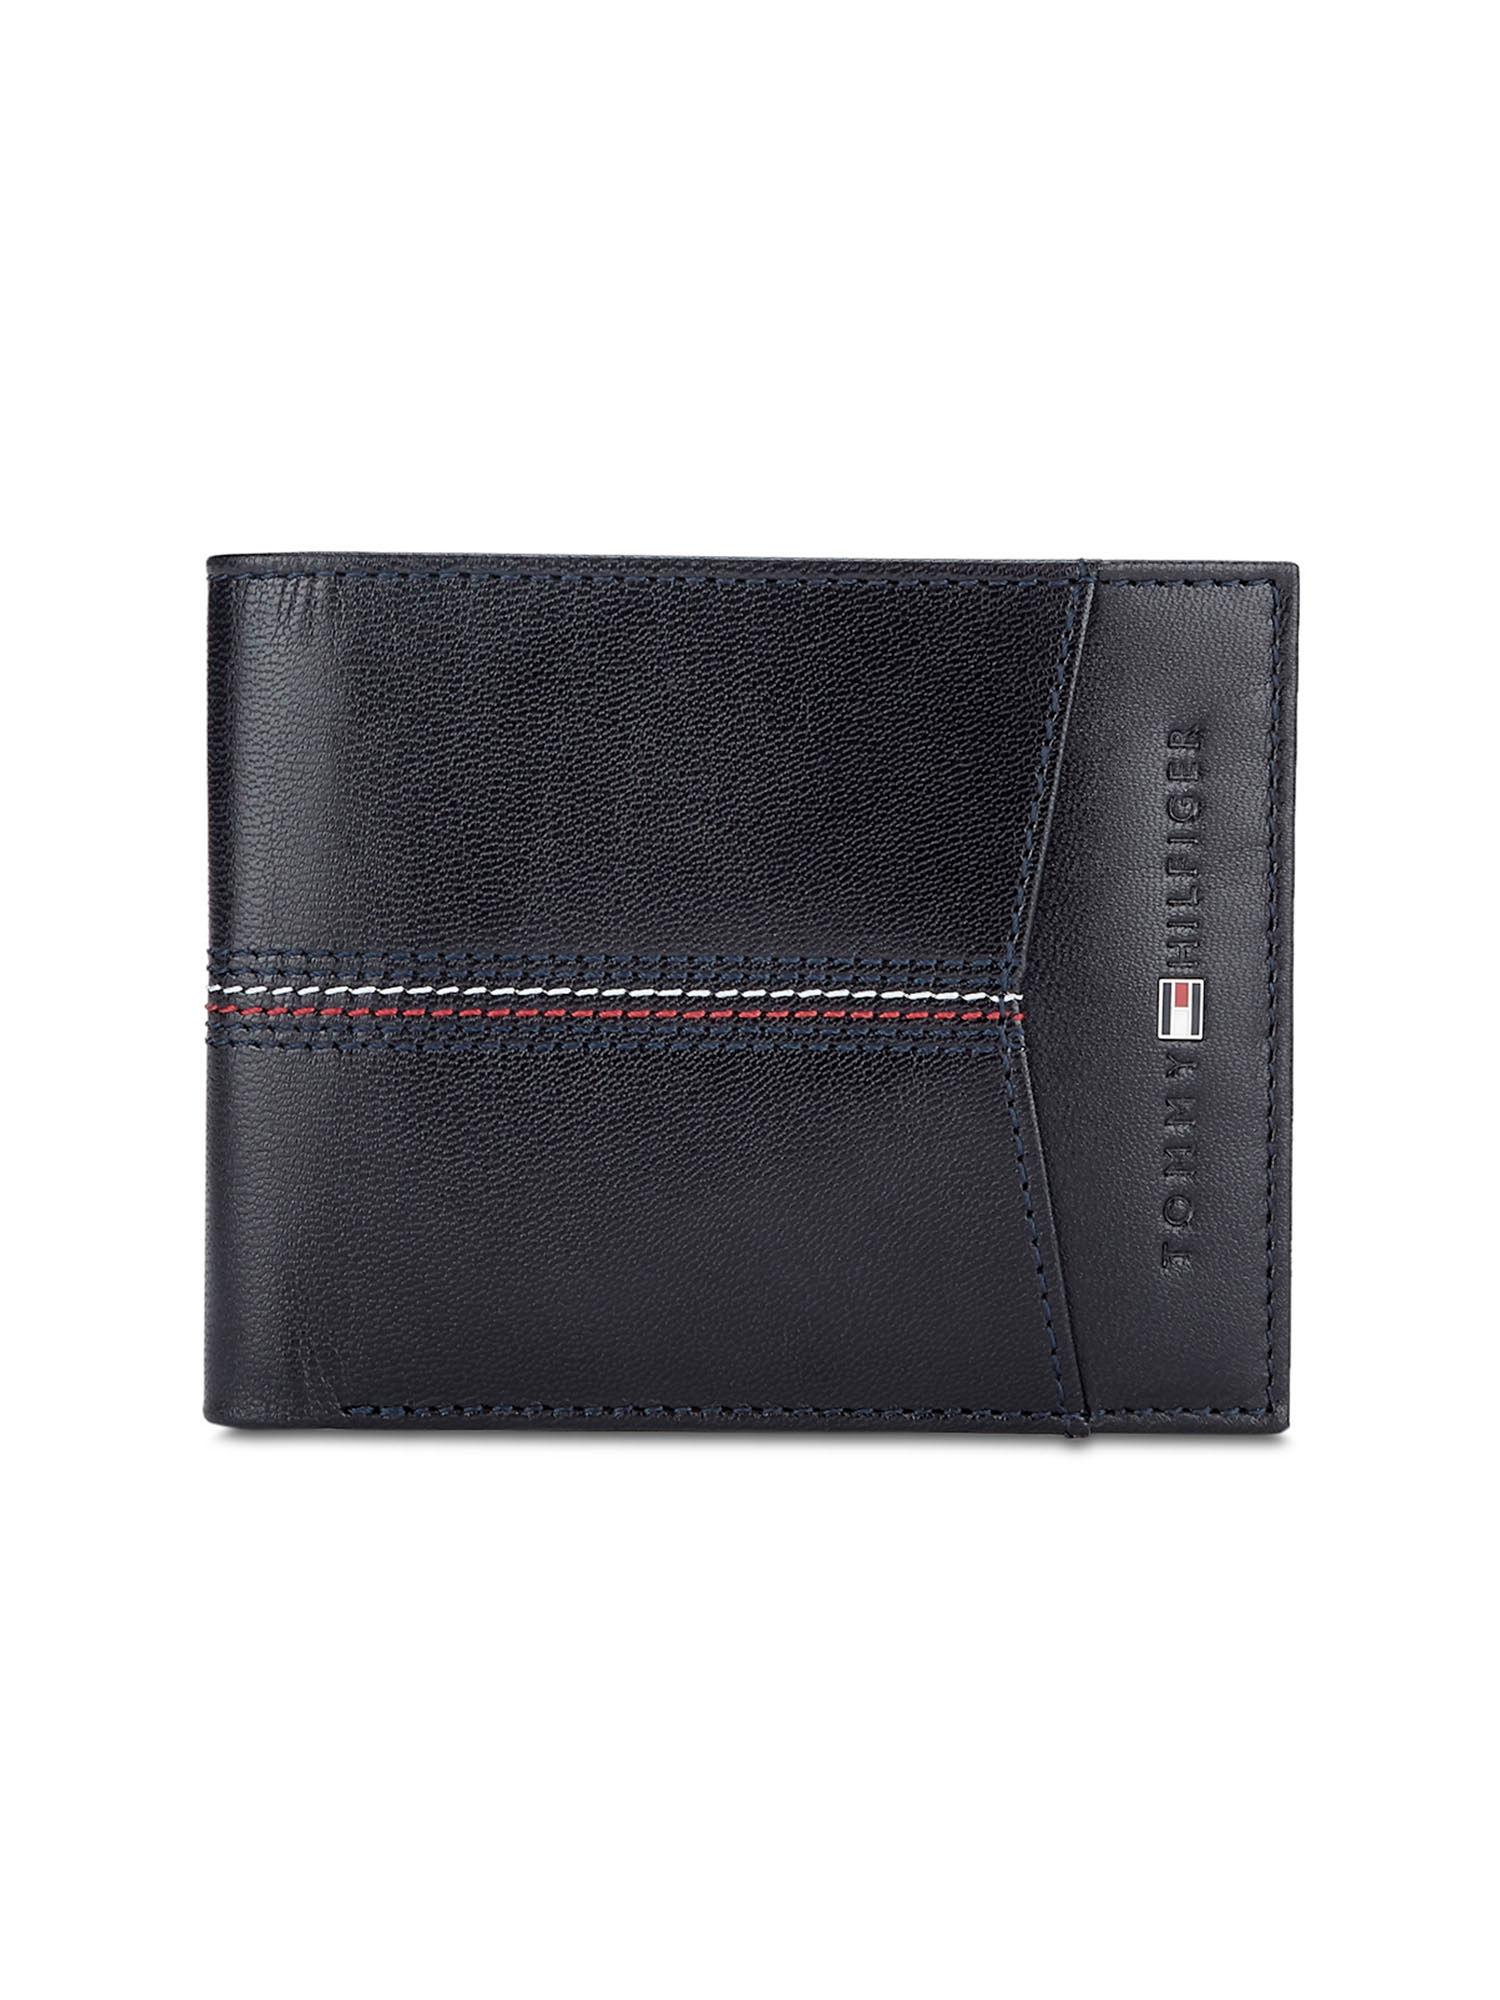 navy-blue-enoch-global-coin-wallet